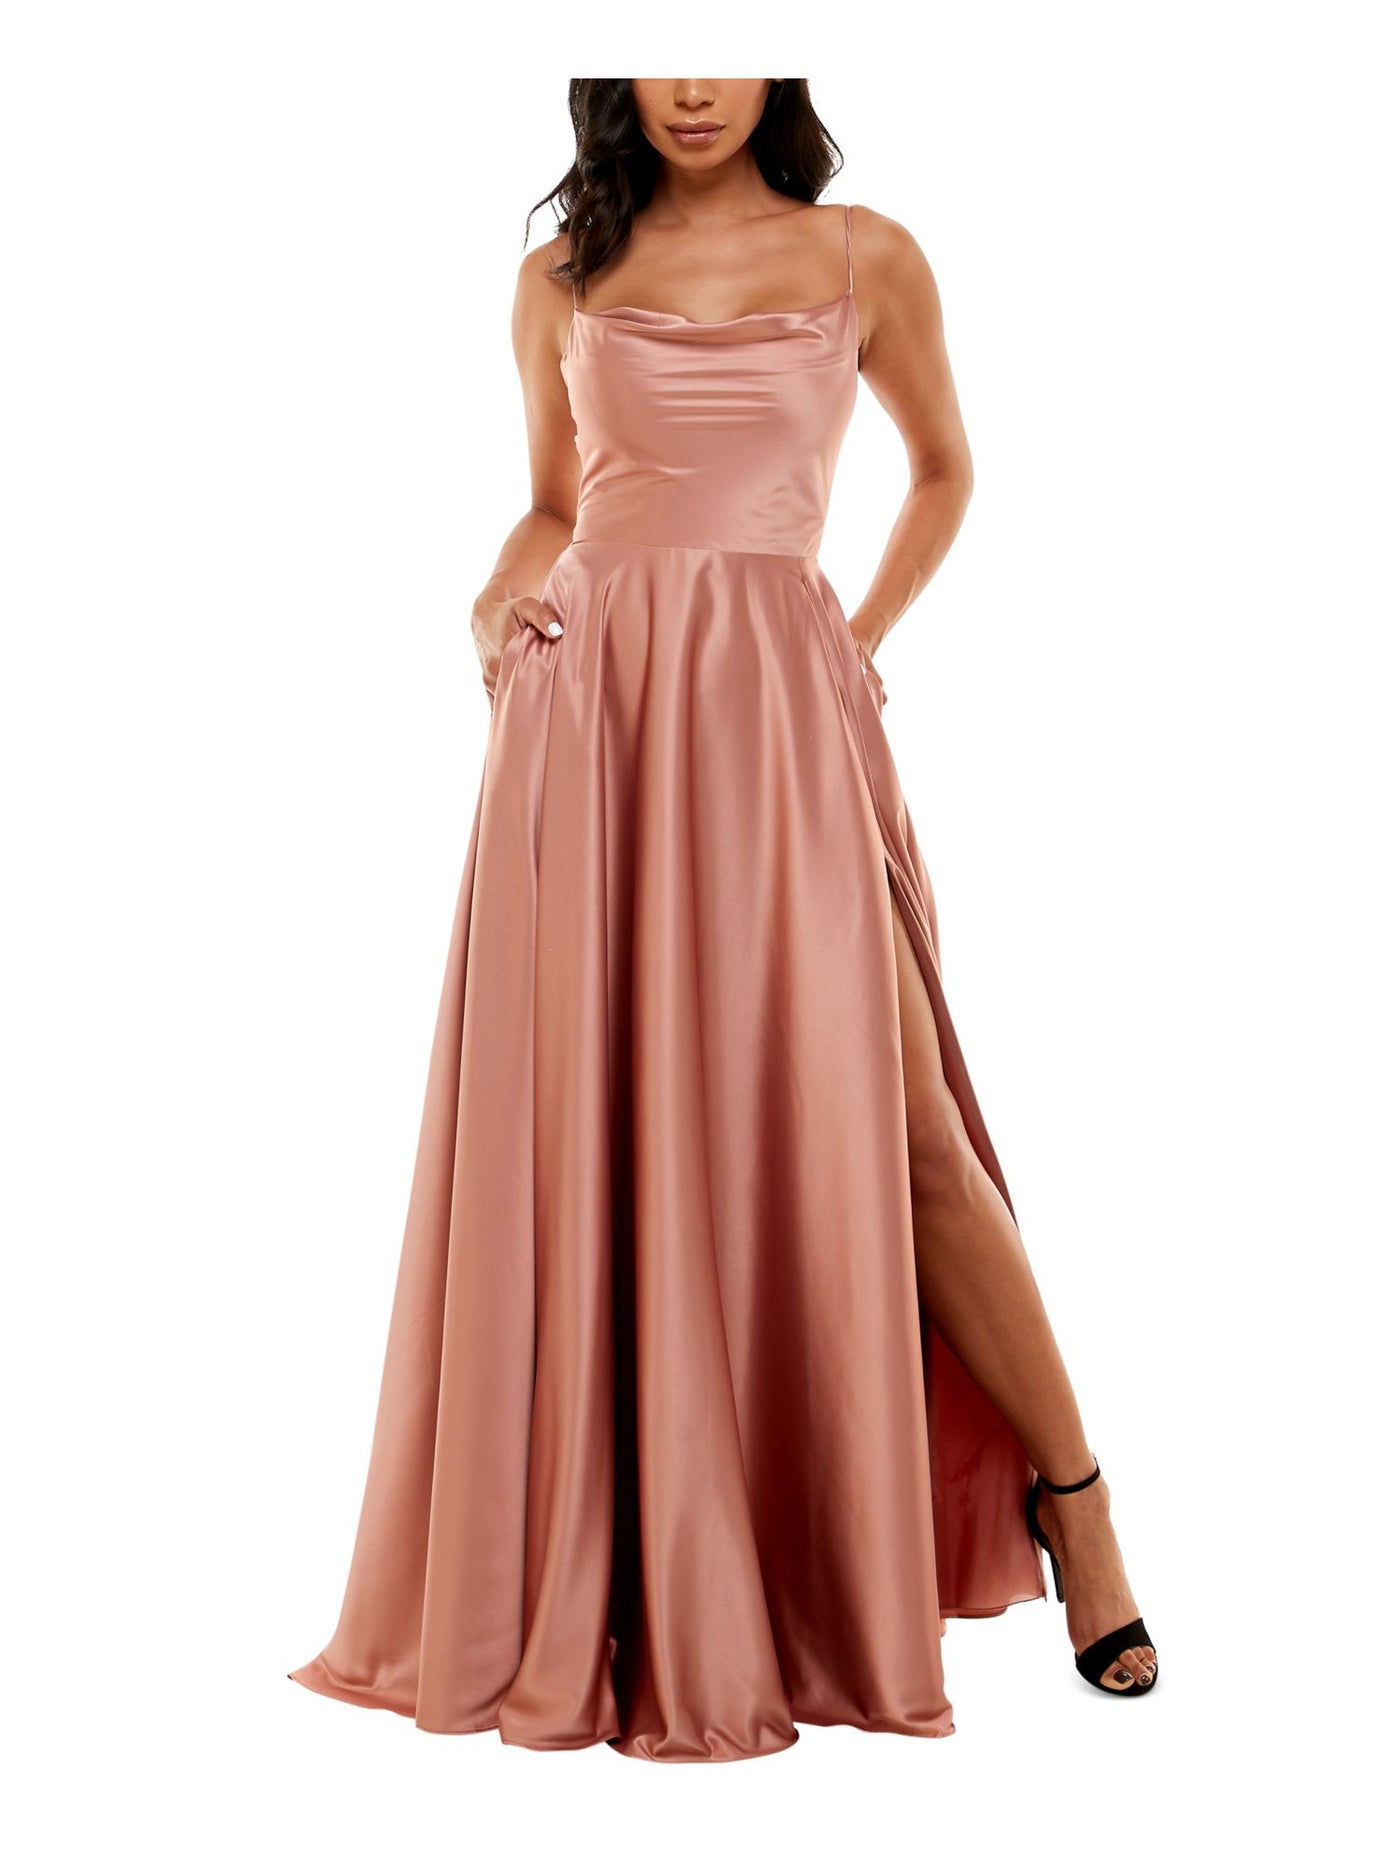 B DARLIN Womens Pink Pocketed Zippered Lace Up Open Back High Slit Spaghetti Strap Cowl Neck Full-Length Prom Fit + Flare Dress Juniors 5\6